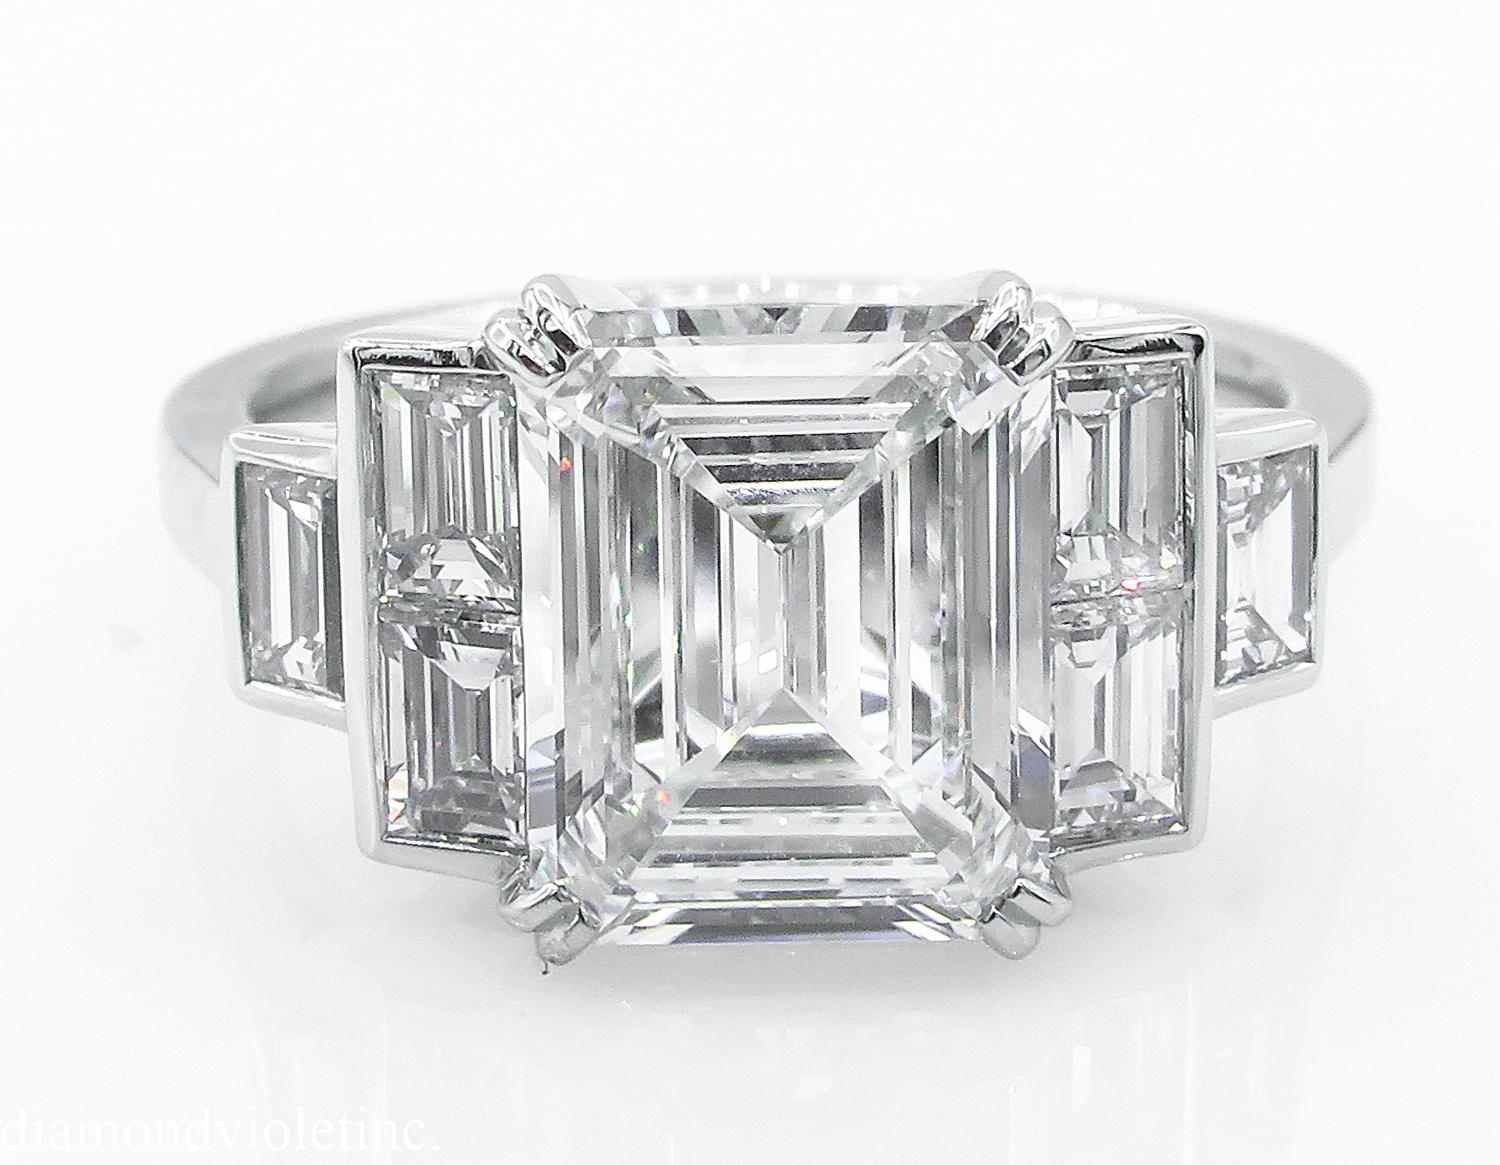 A Timeless Elegant Estate Vintage Diamond Engagement Ring with GIA Certified 2.01ct Emerald cut Center Diamond in E color VS1 clarity (COLORLESS and Very Clean); with measurements of 9.01x7.23x3.51mm; appears much LARGER than its size!! GIA report